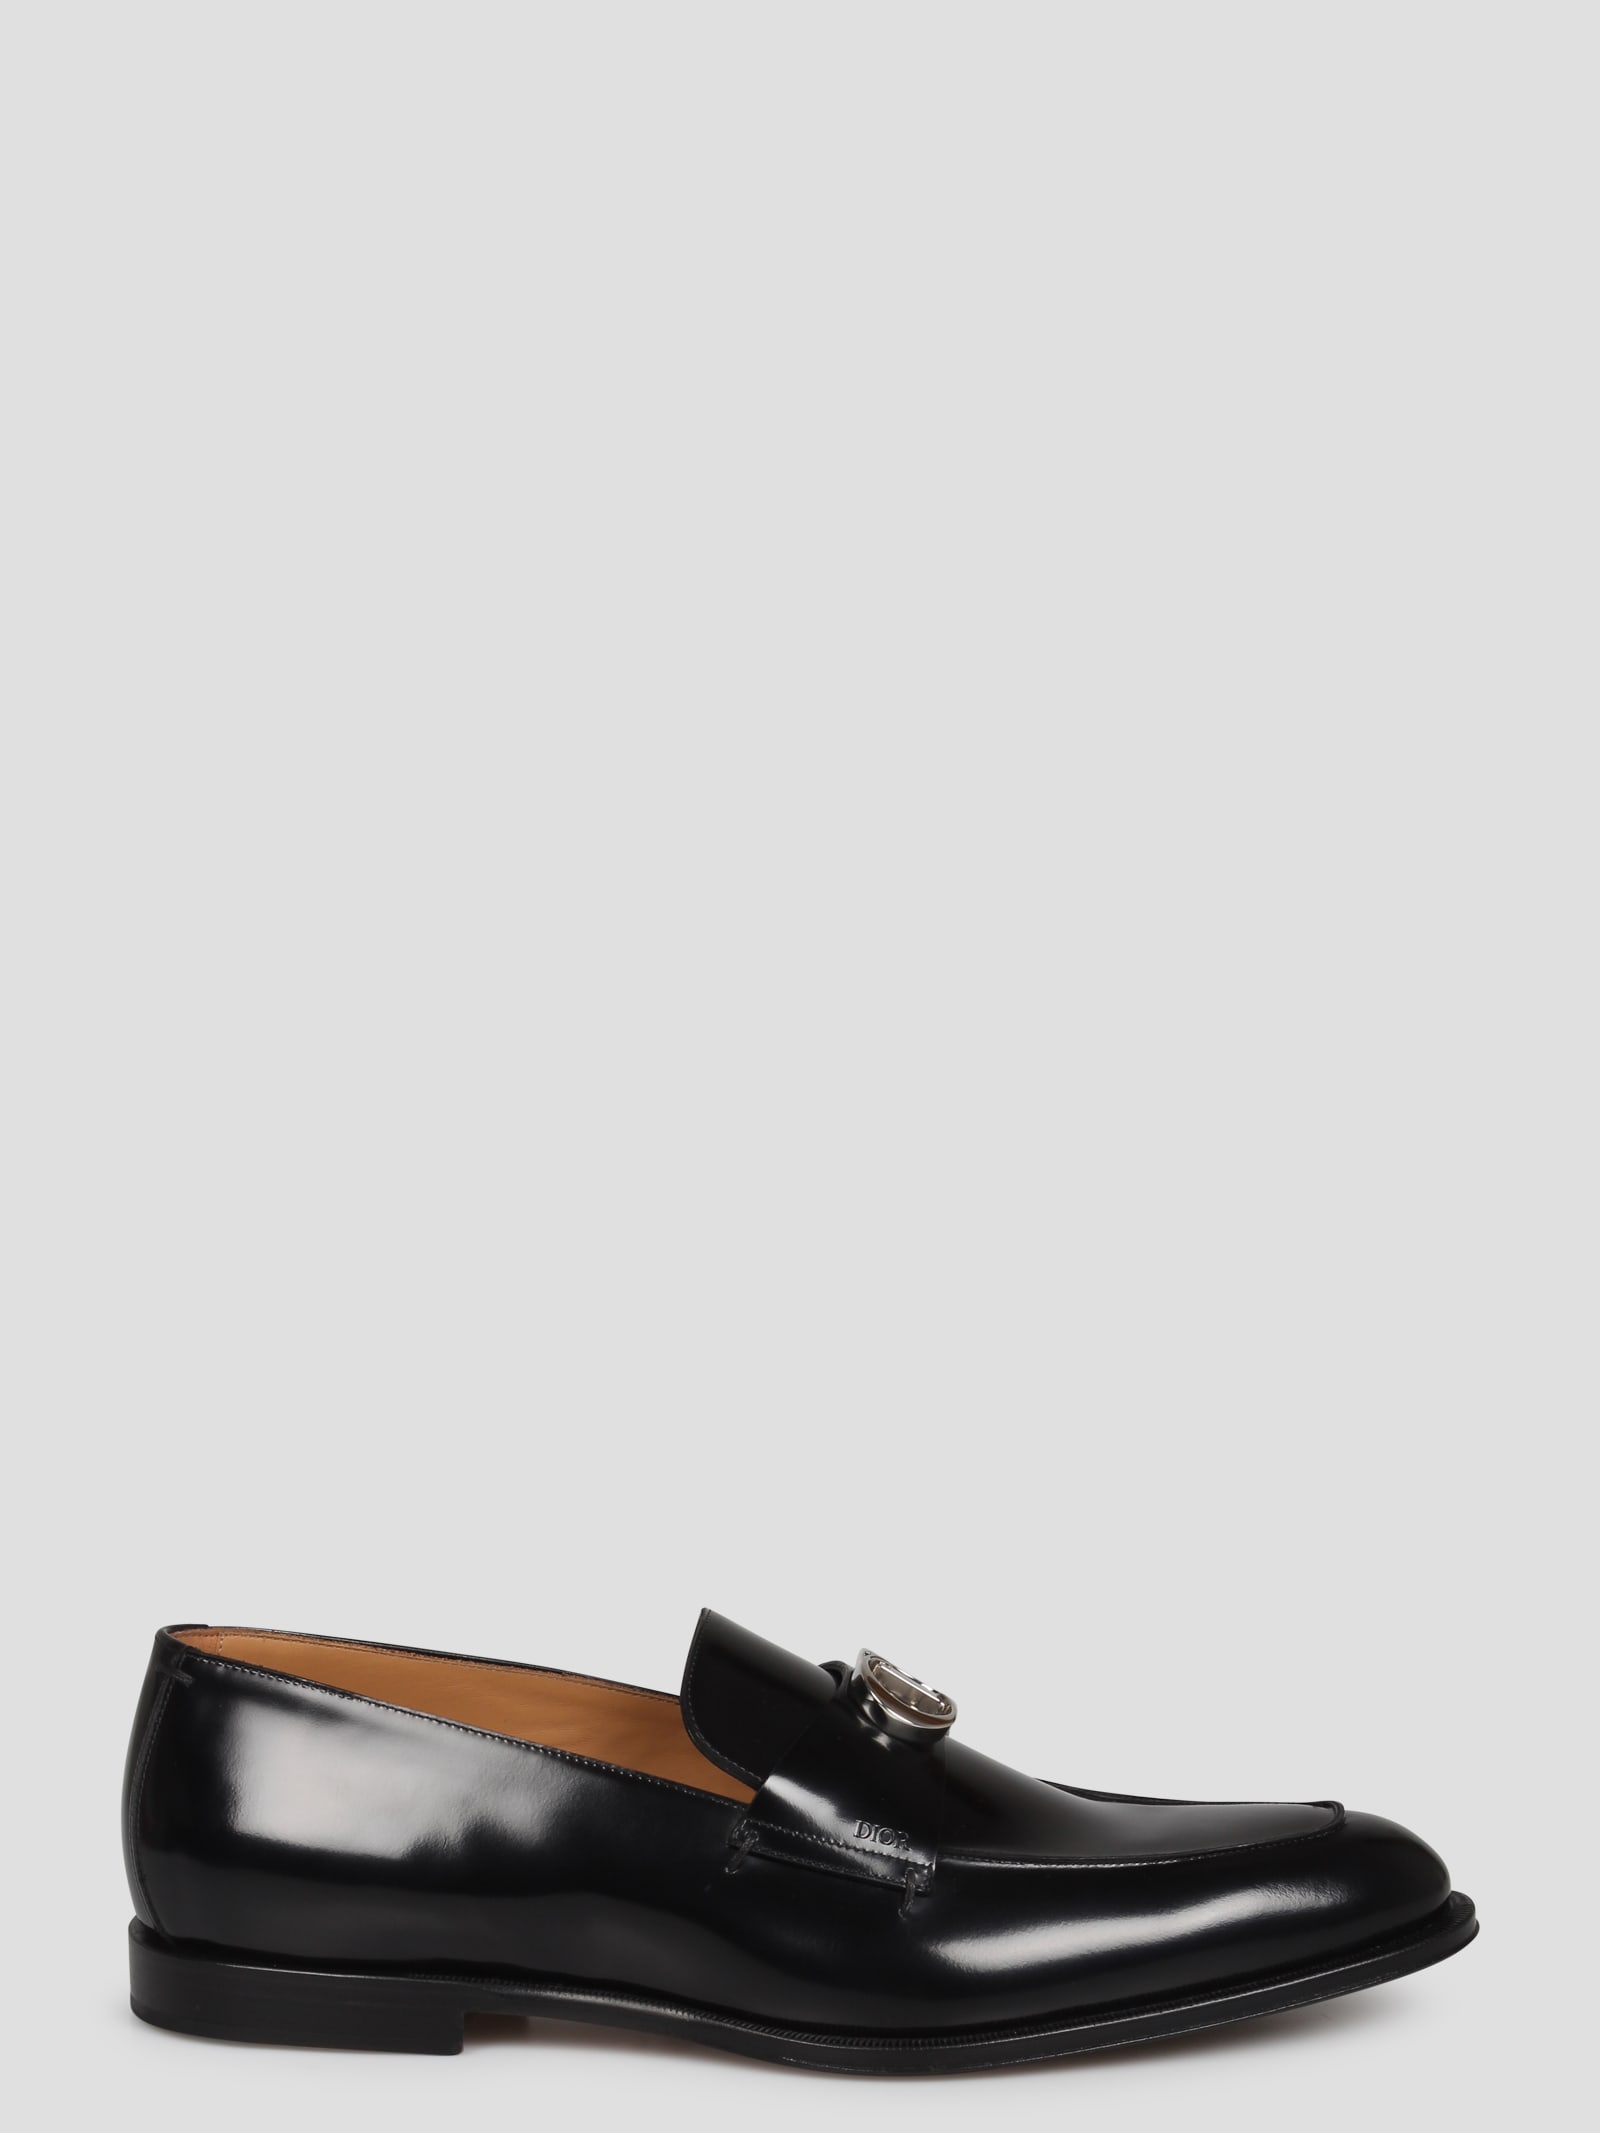 Dior Cd Loafers